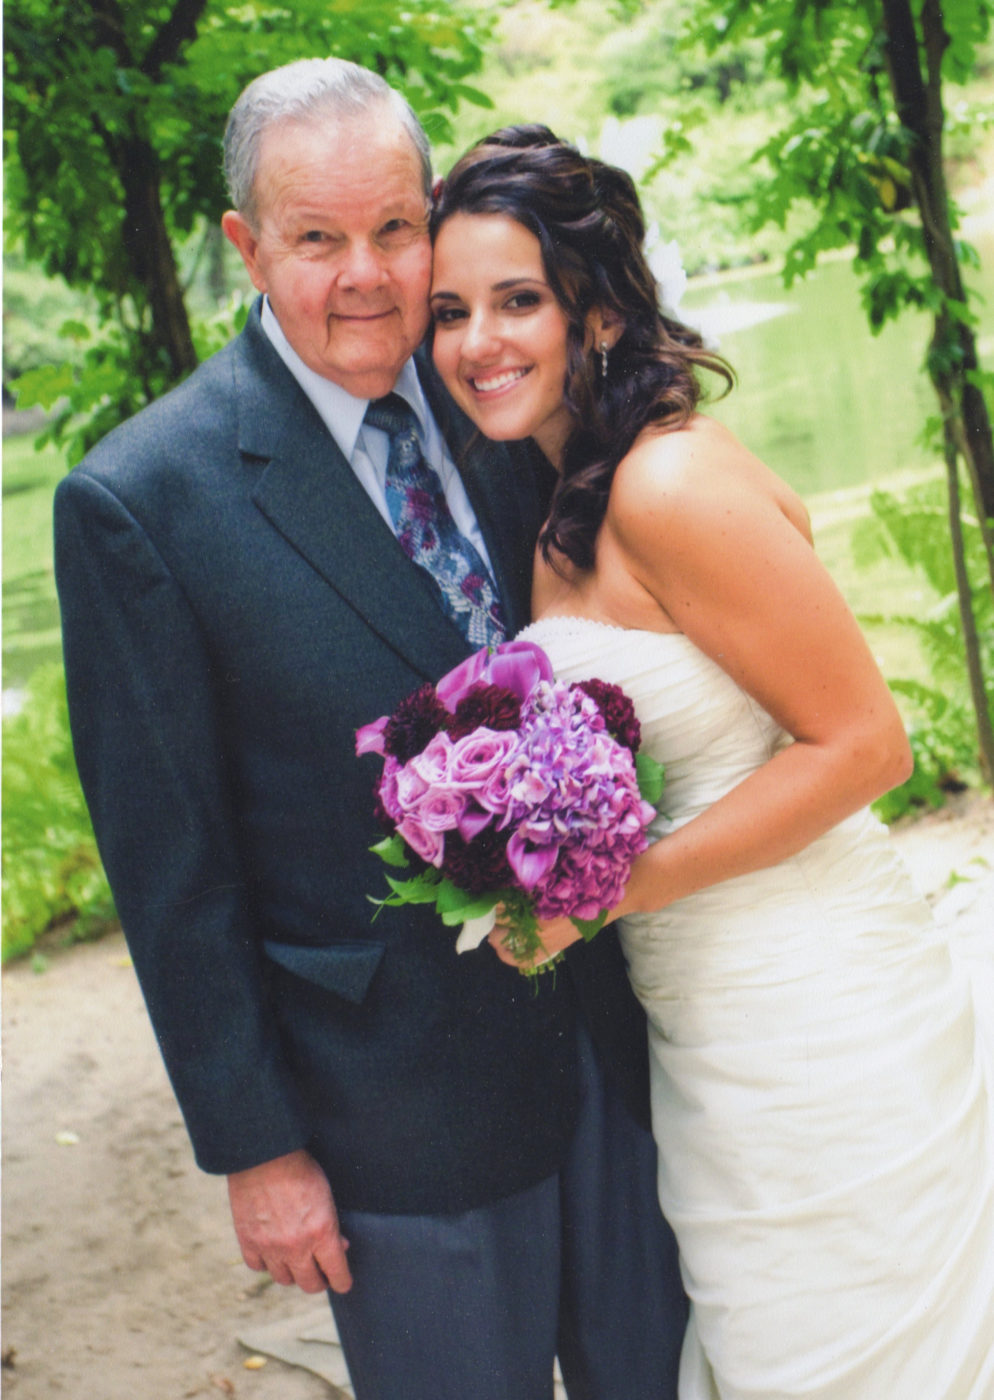 grandfather and granddaughter pose together on her wedding day